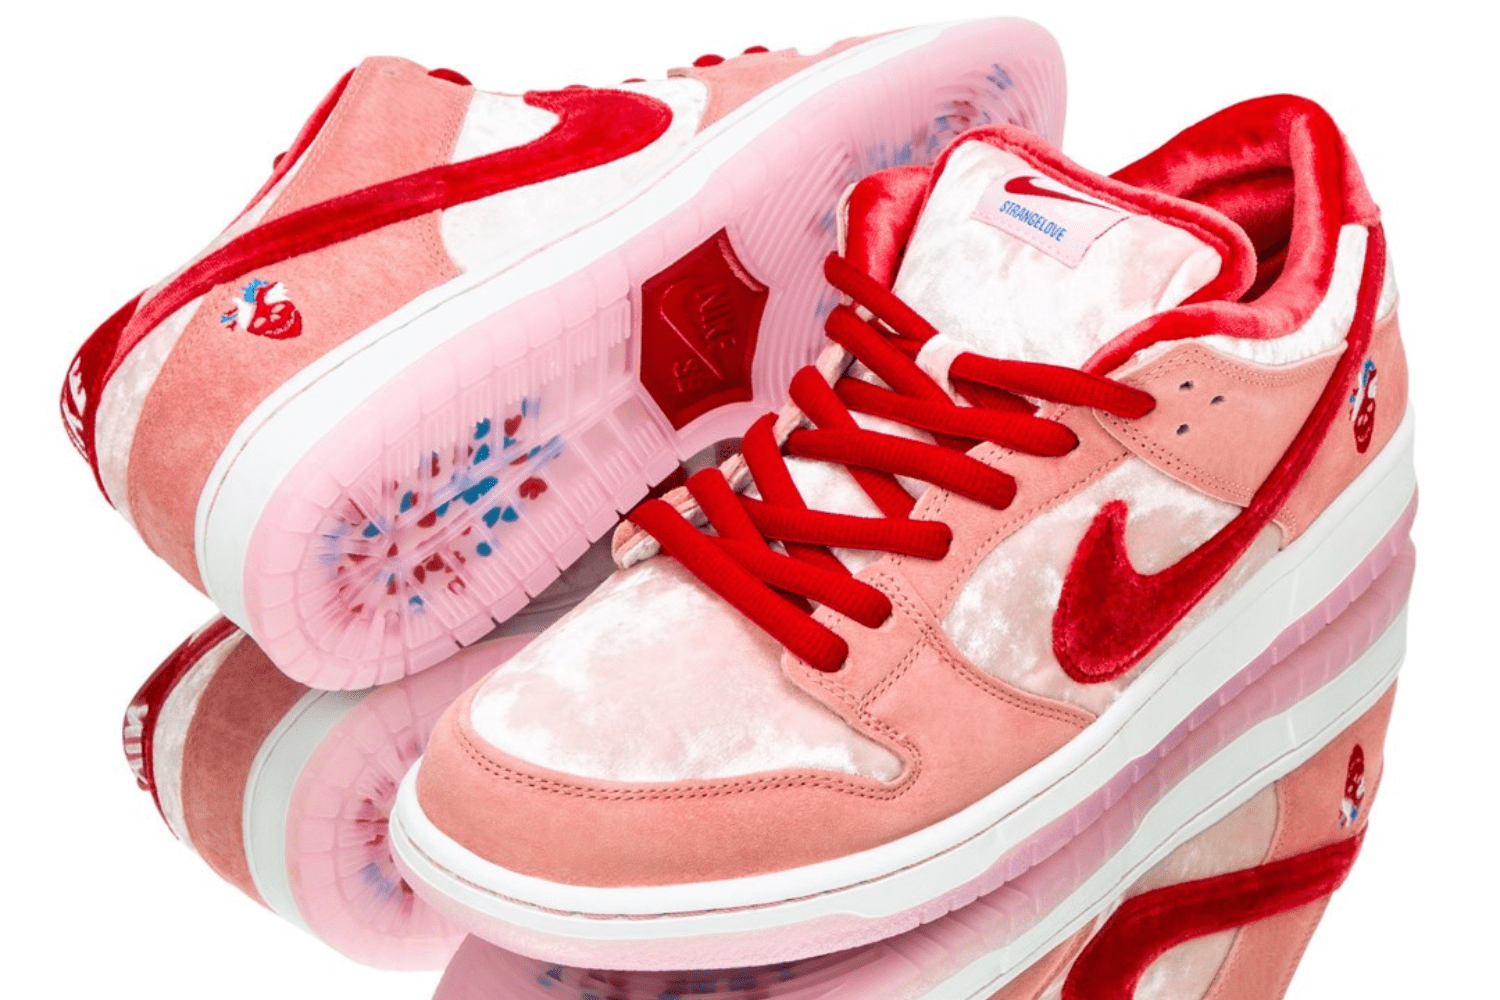 Every day is Valentine's Day with these beloved sneakers from Flight Club